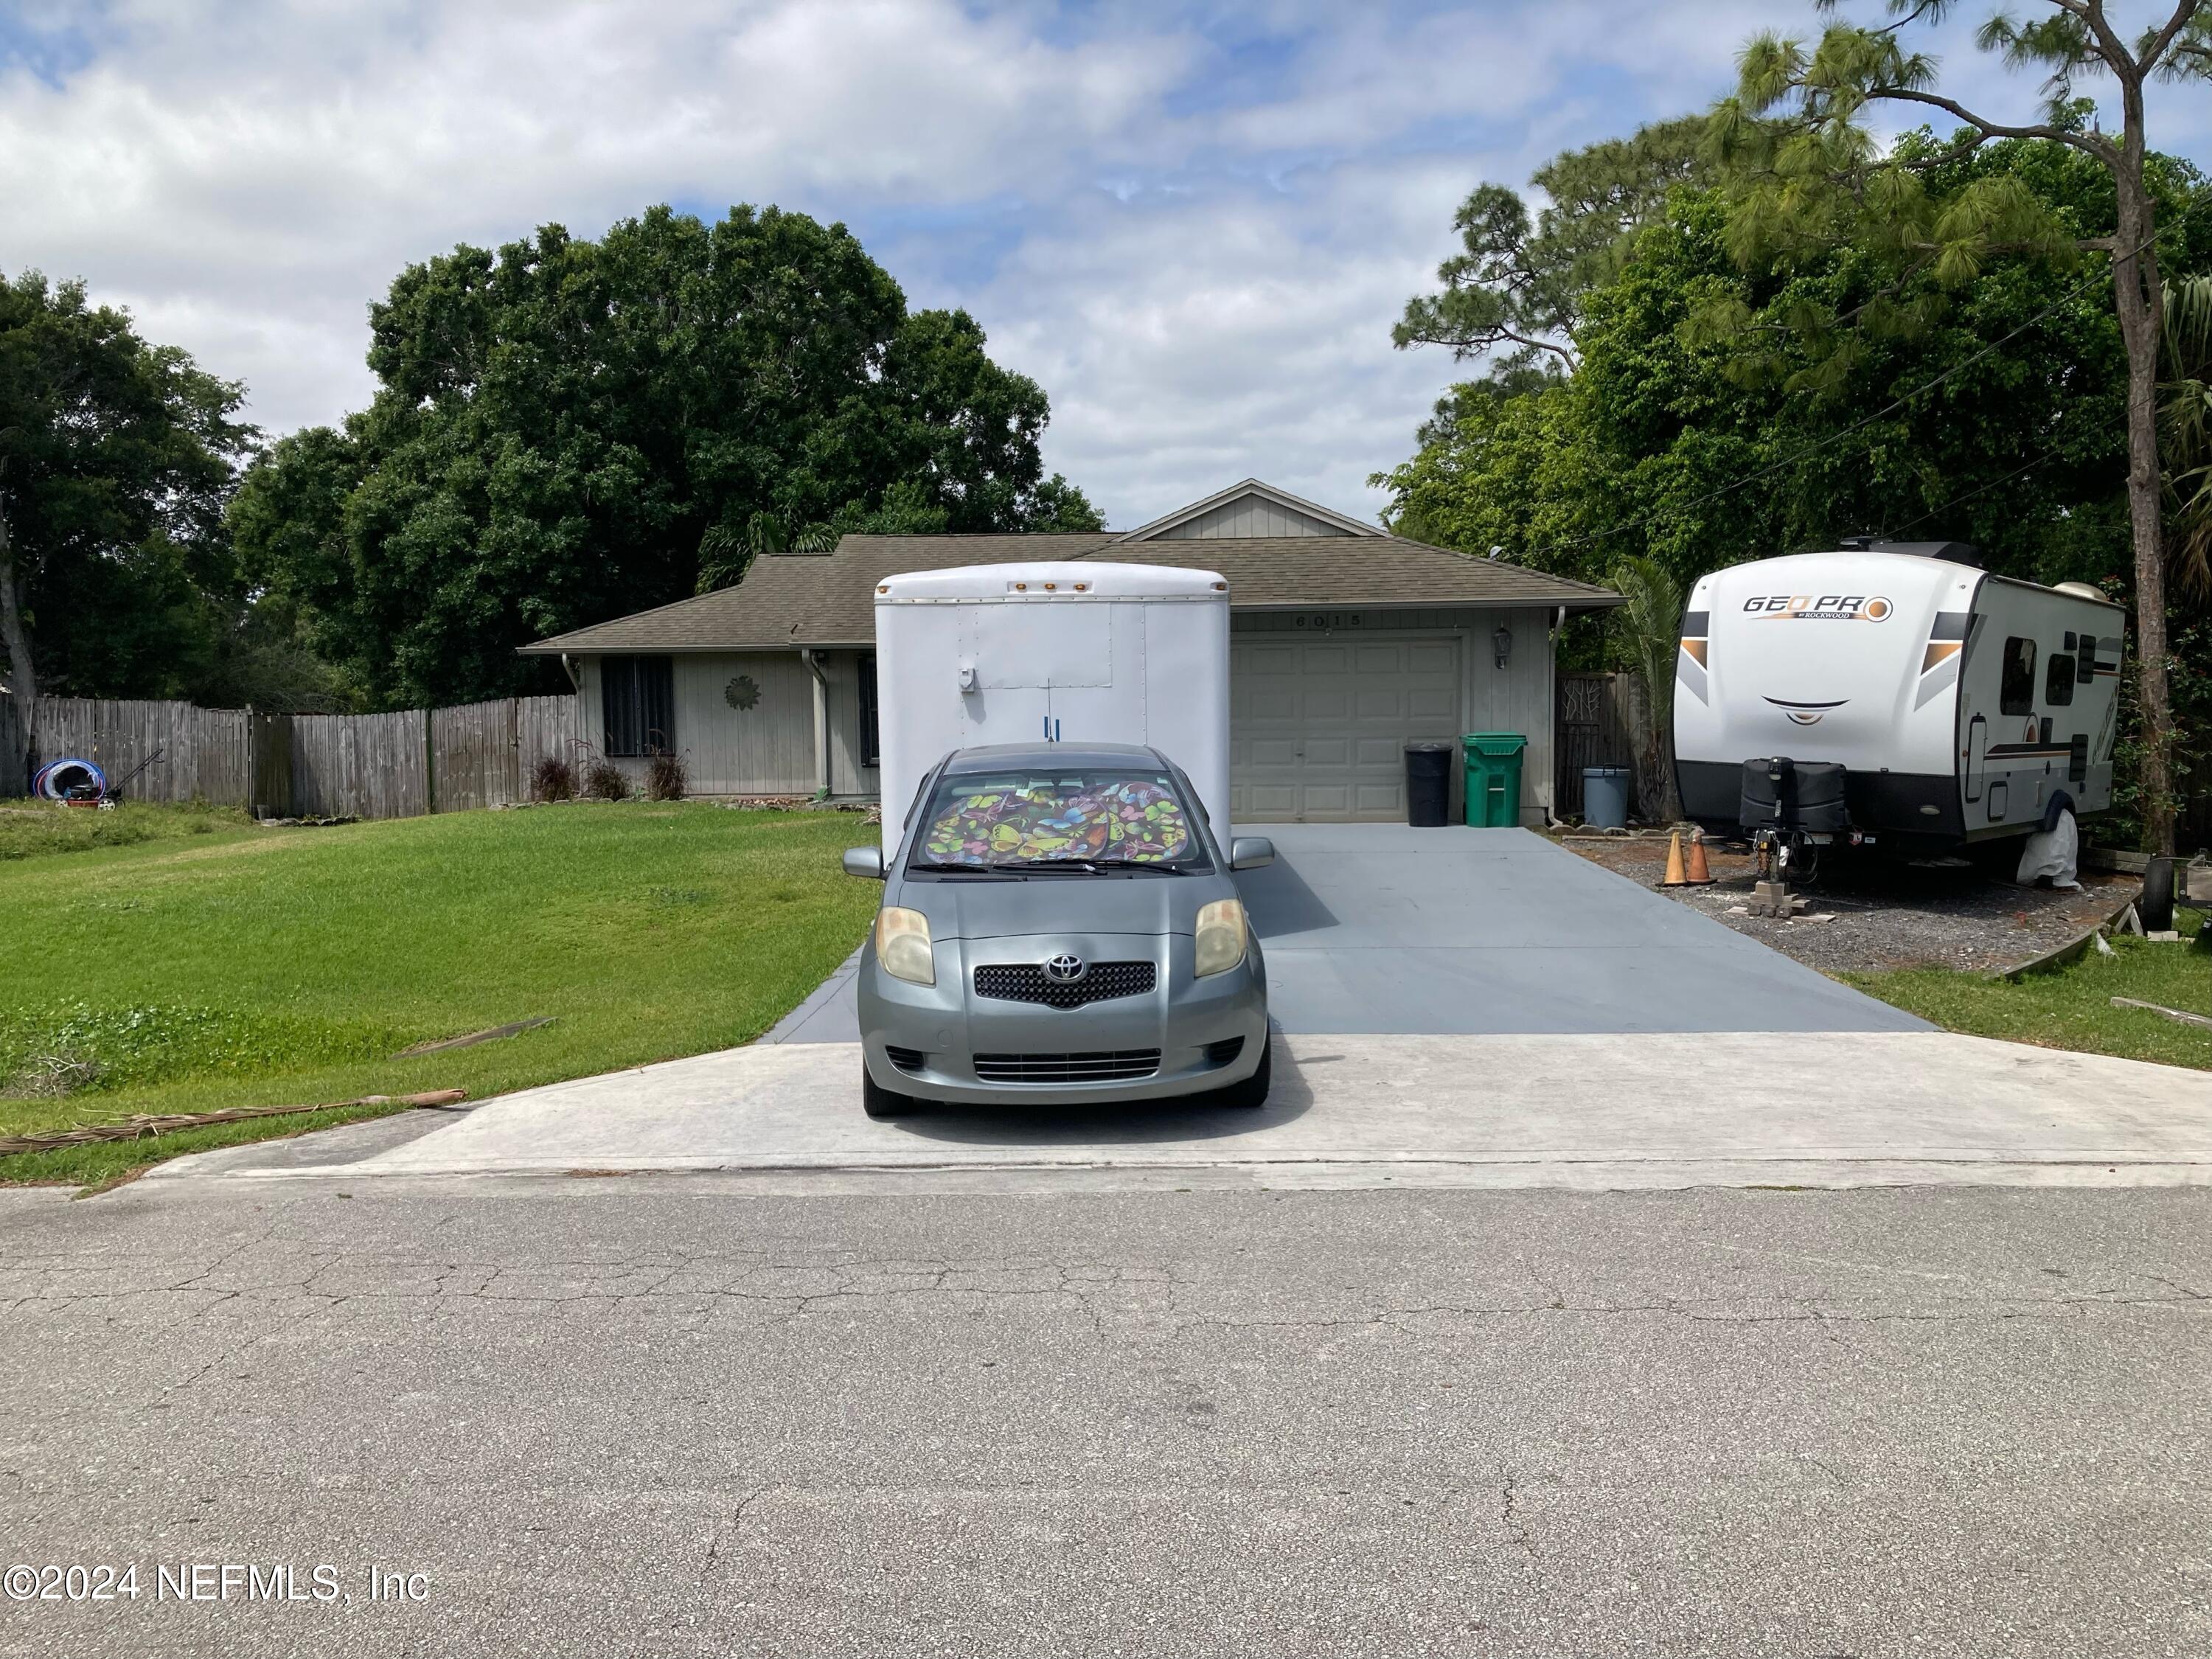 a car parked in front of a house with a yard